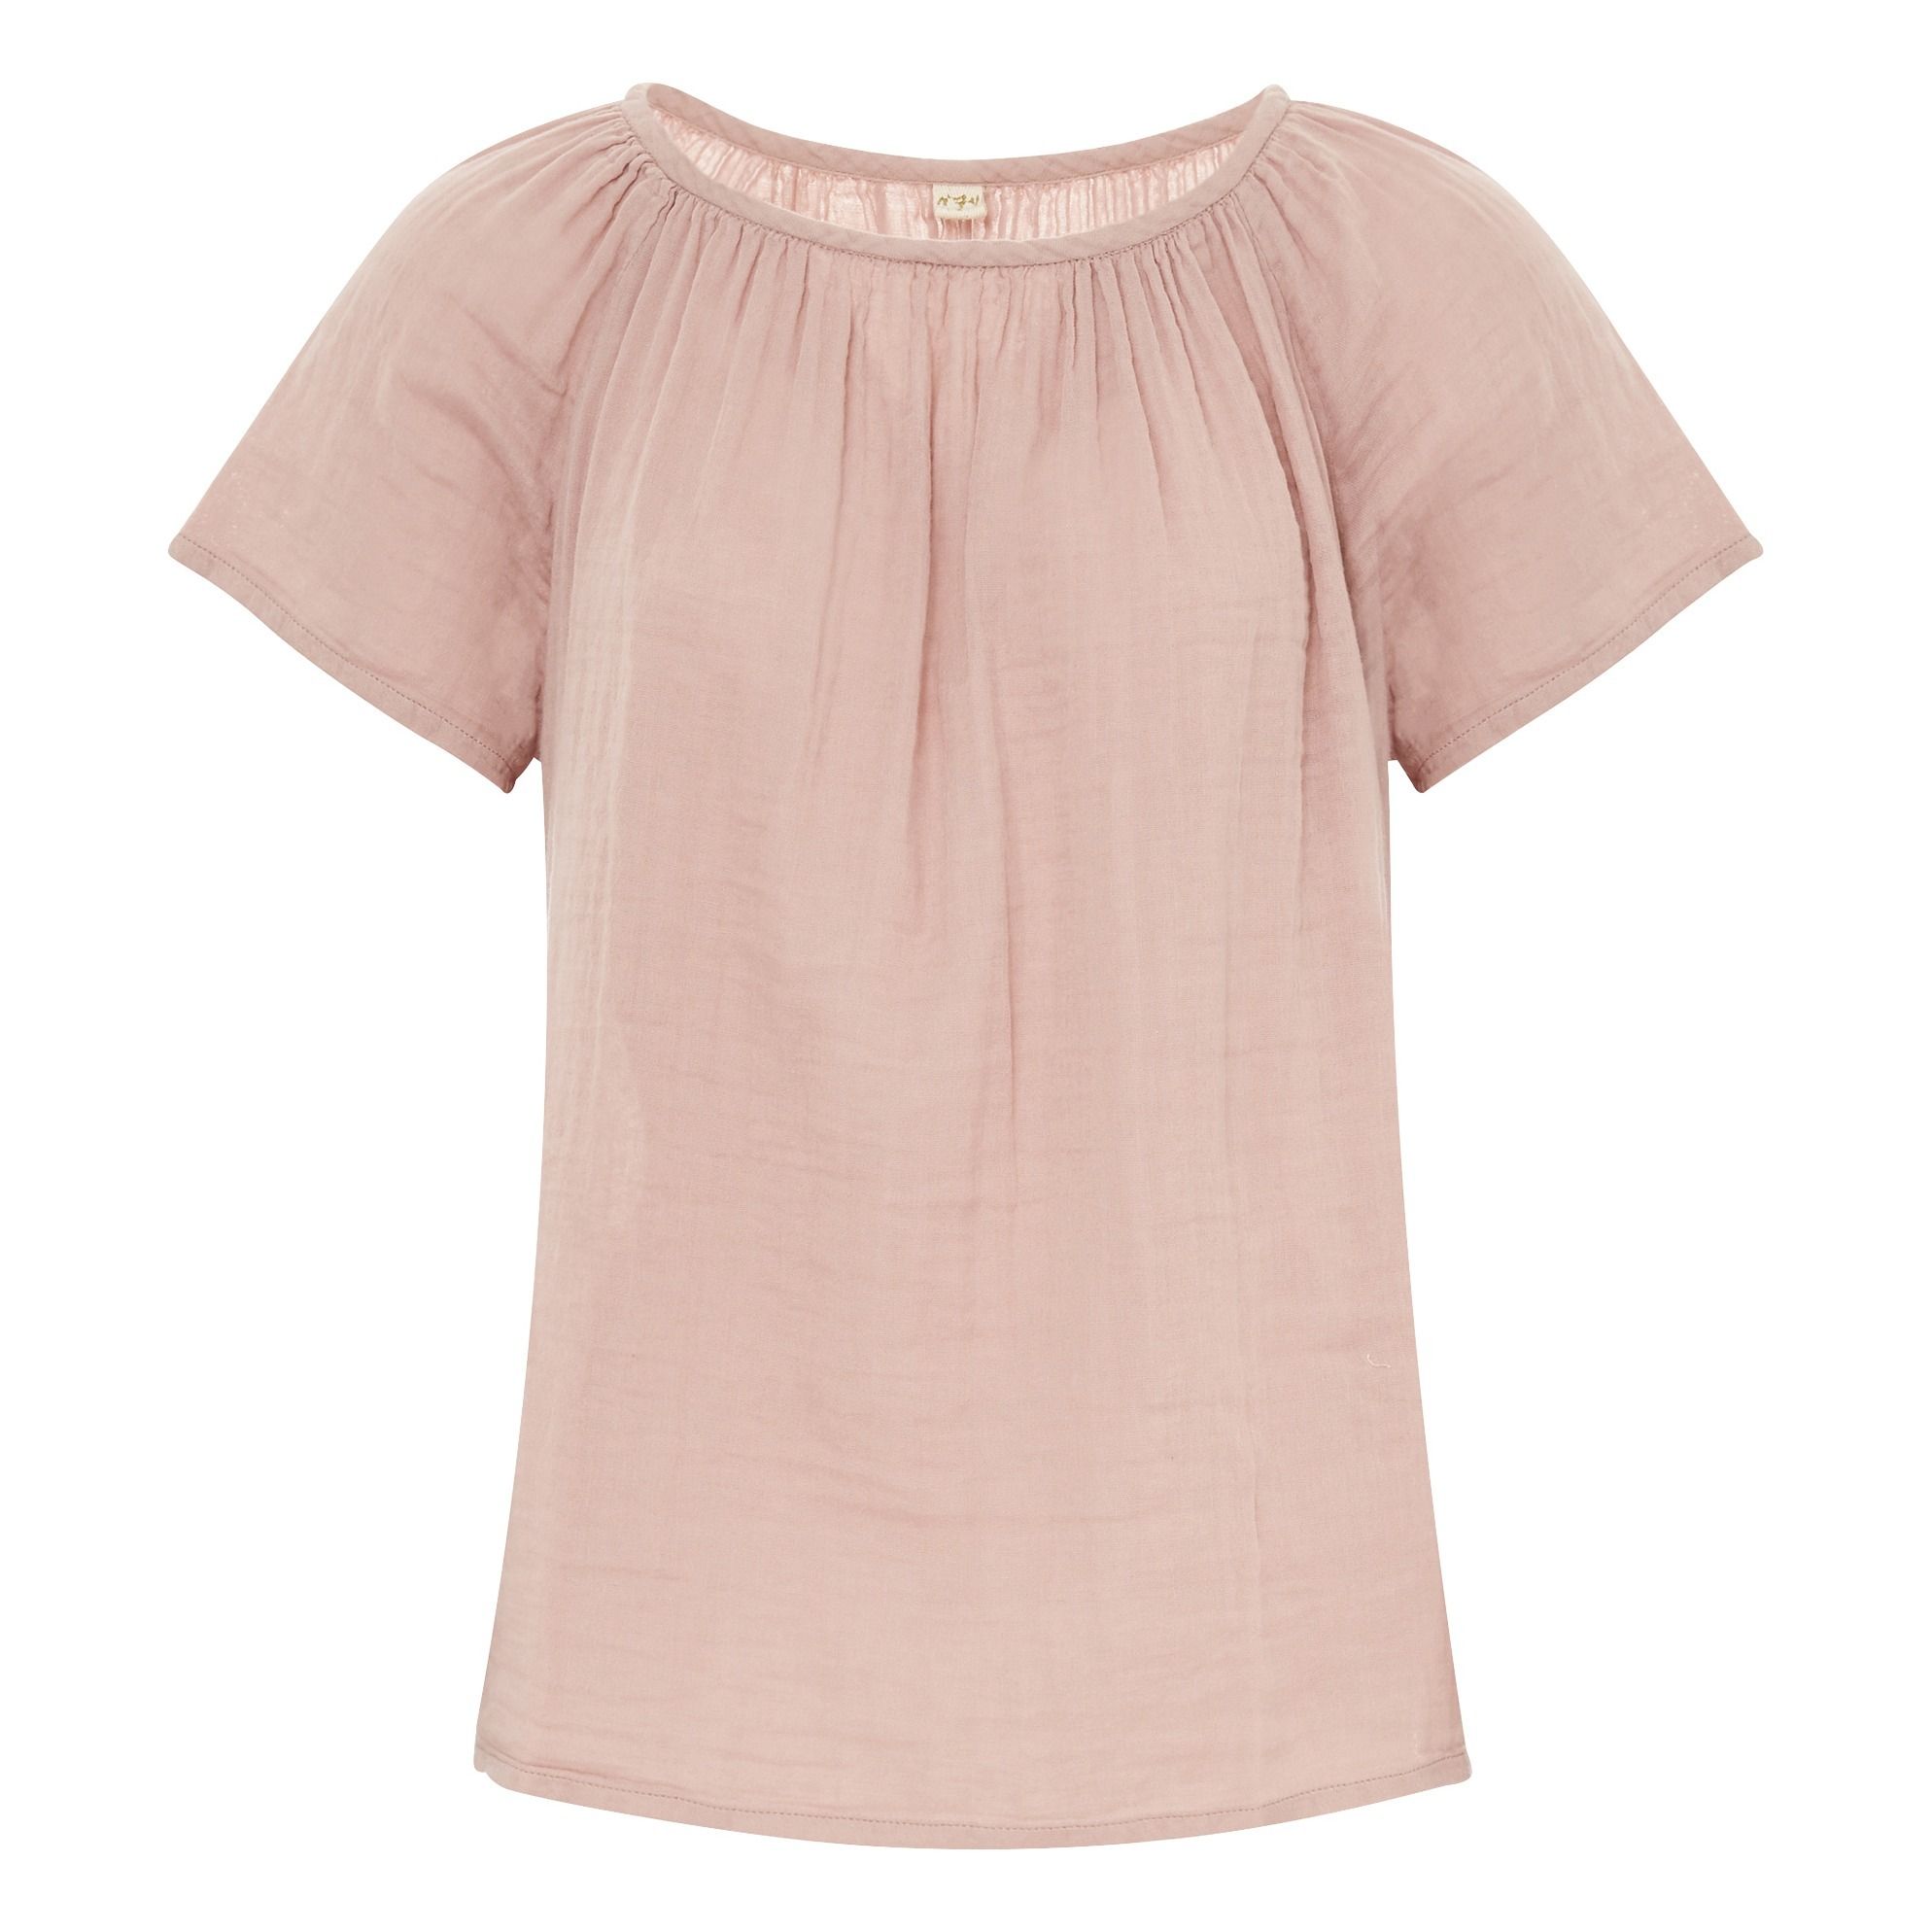 Numero 74 - Top Clara - Collection Femme - - Dusty Pink S007